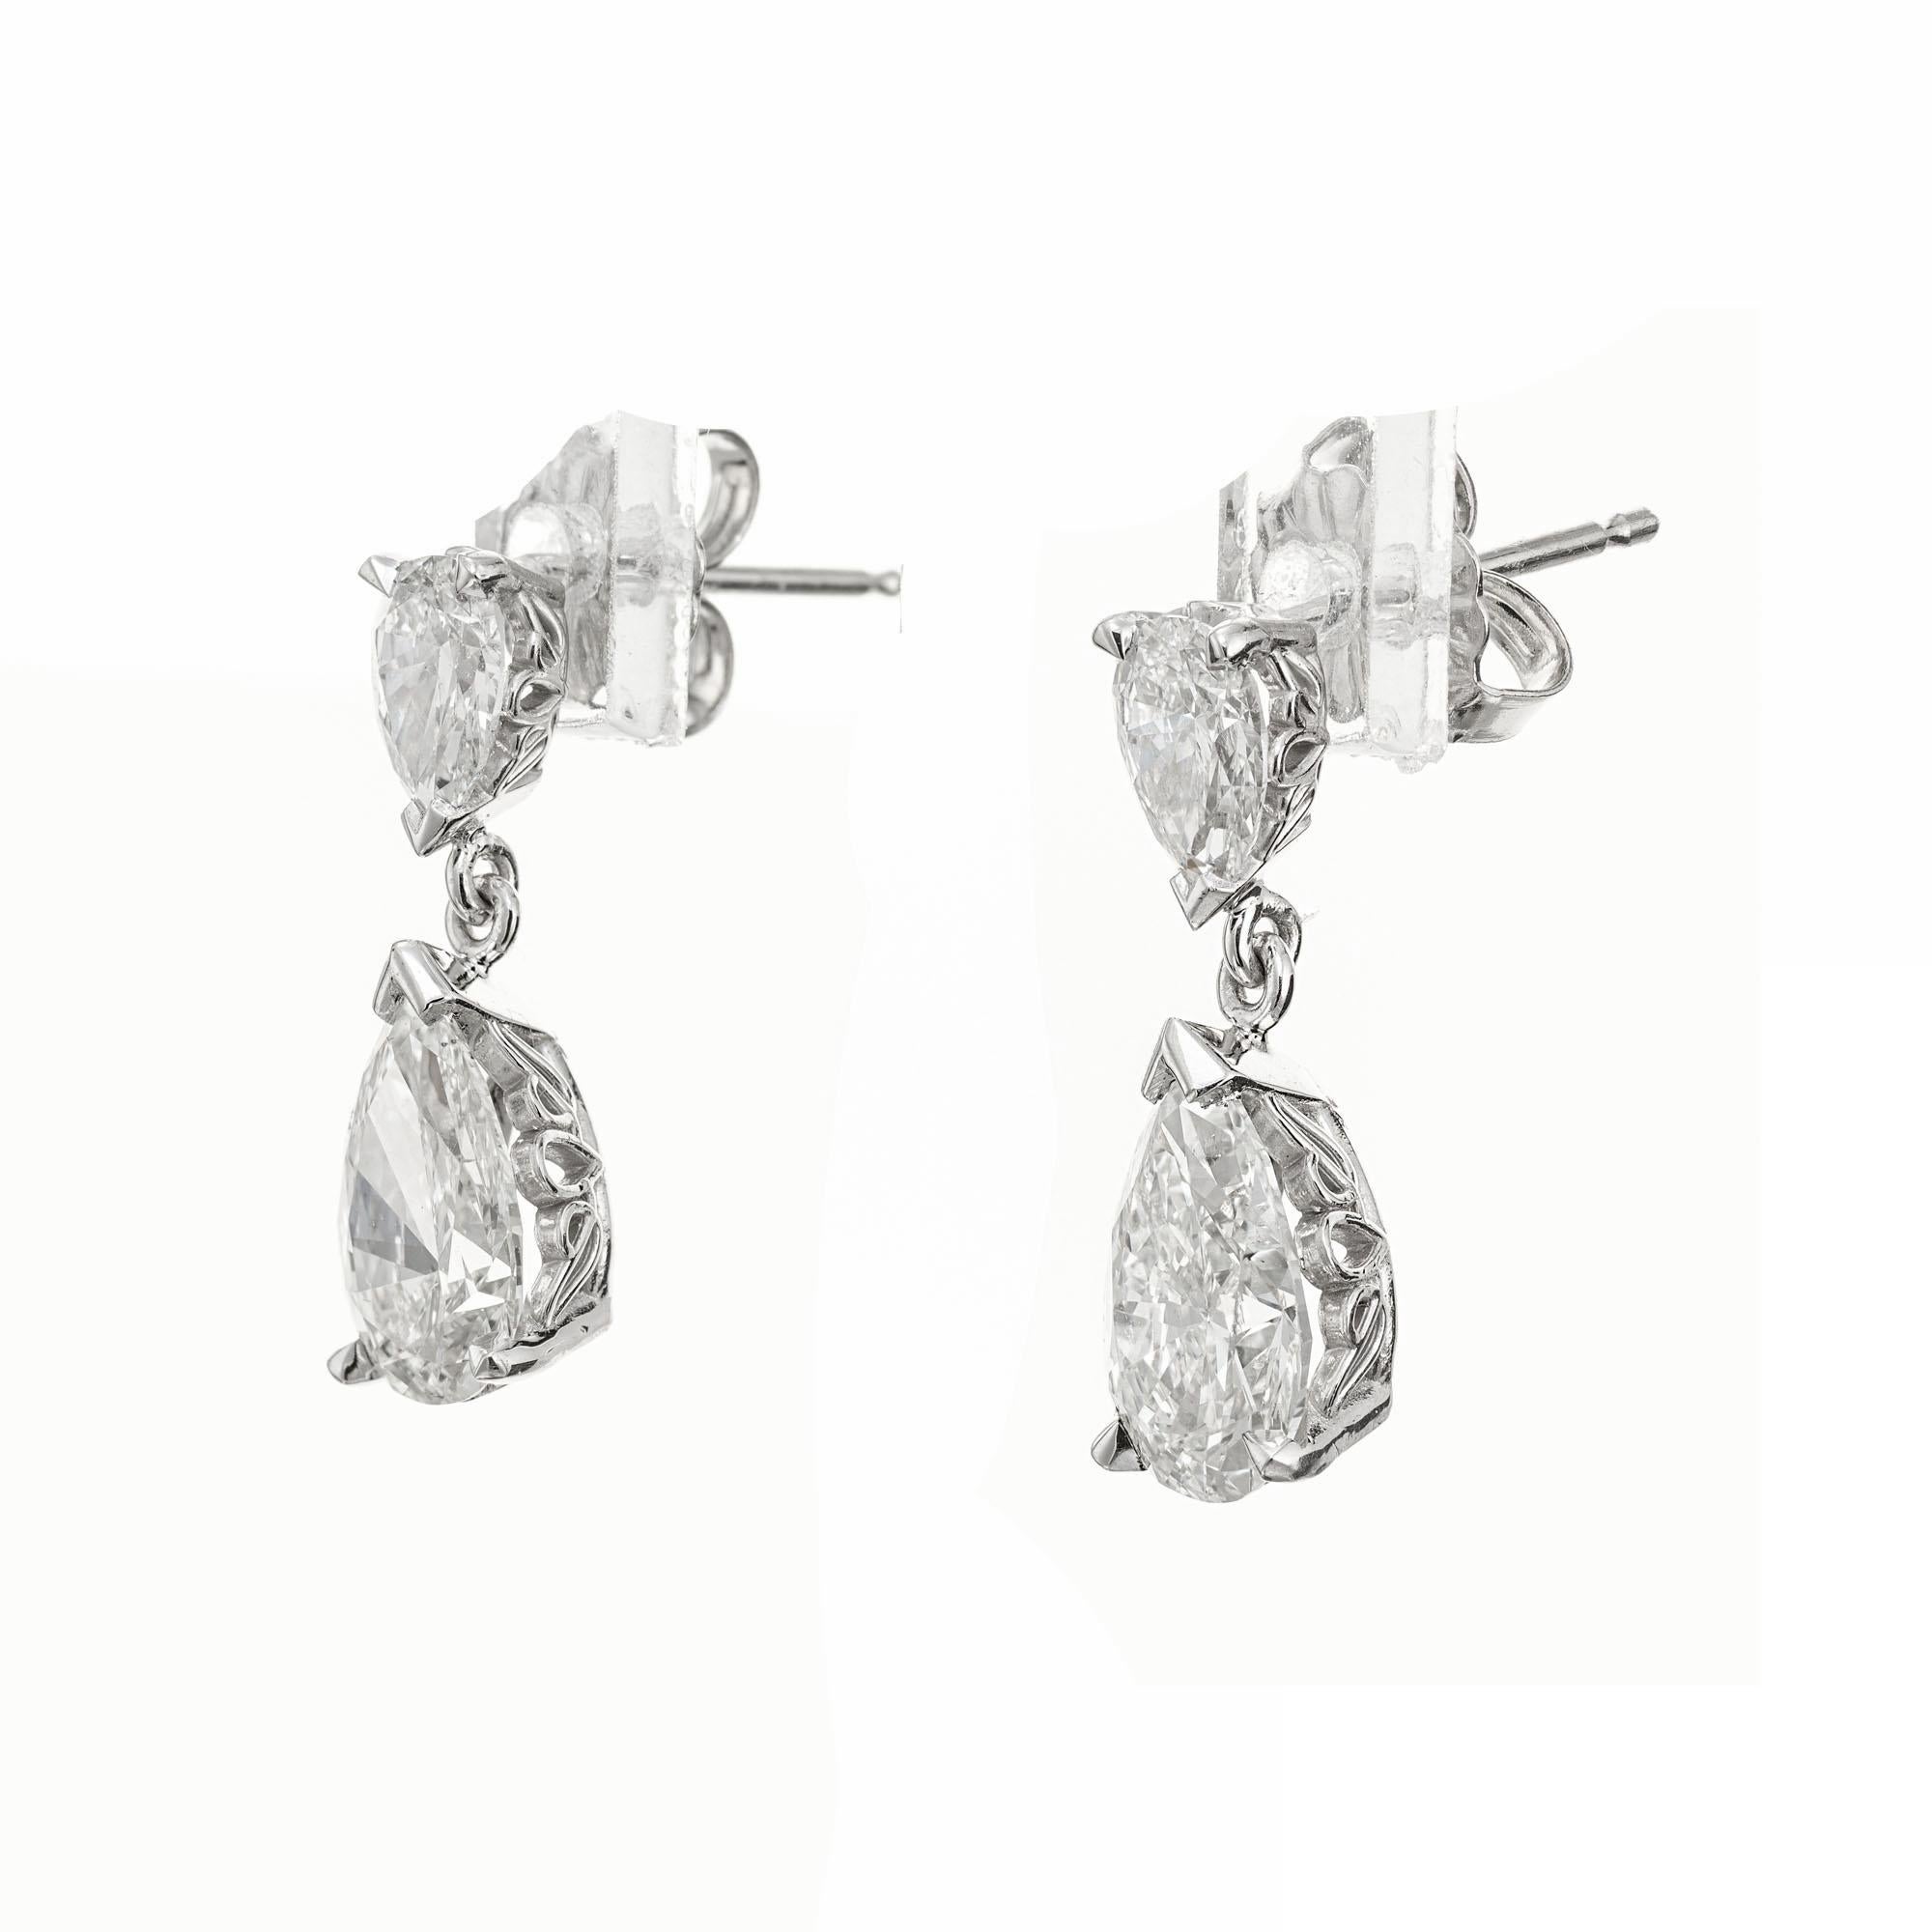 Platinum scroll design pear shape diamond dangle earrings. The bottom two diamonds are GIA certified, with 2 top pear shaped diamonds set in platinum. Designed and crafted in the Peter Suchy workshop 

1 pear shape diamond, J SI2 approx. 1.01cts GIA